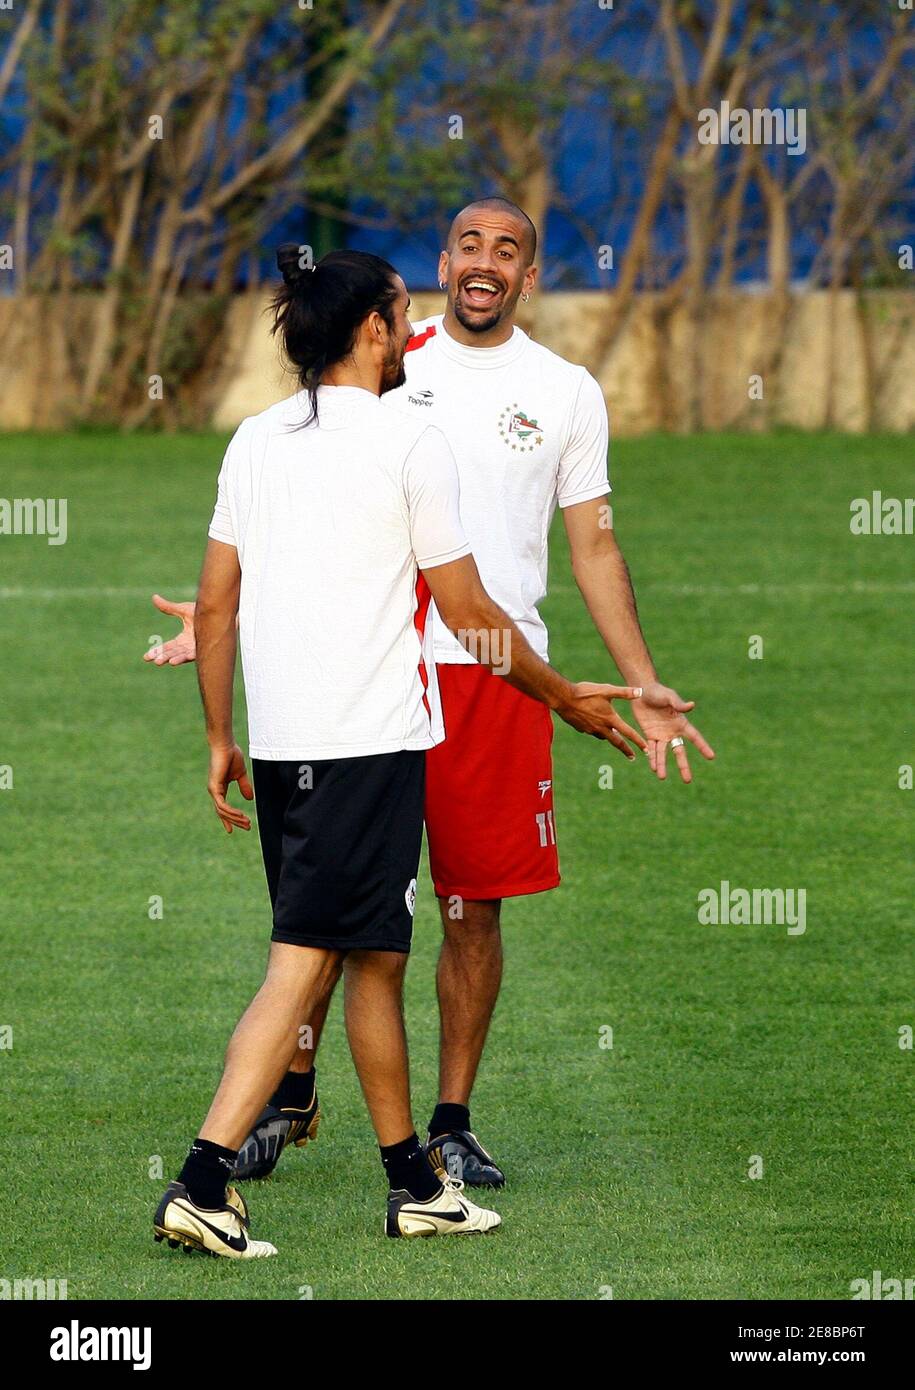 Estudiantes' Juan Sebastian Veron (R) speaks with teammate Christian Cellay during a training session in Abu Dhabi December 18, 2009. Argentina's Estudiantes, the South American champions, play Barcelona in Saturday's FIFA Club World Cup final soccer match. REUTERS/Fahad Shadeed (UNITED ARAB EMIRATES - Tags: SPORT SOCCER) Stock Photo